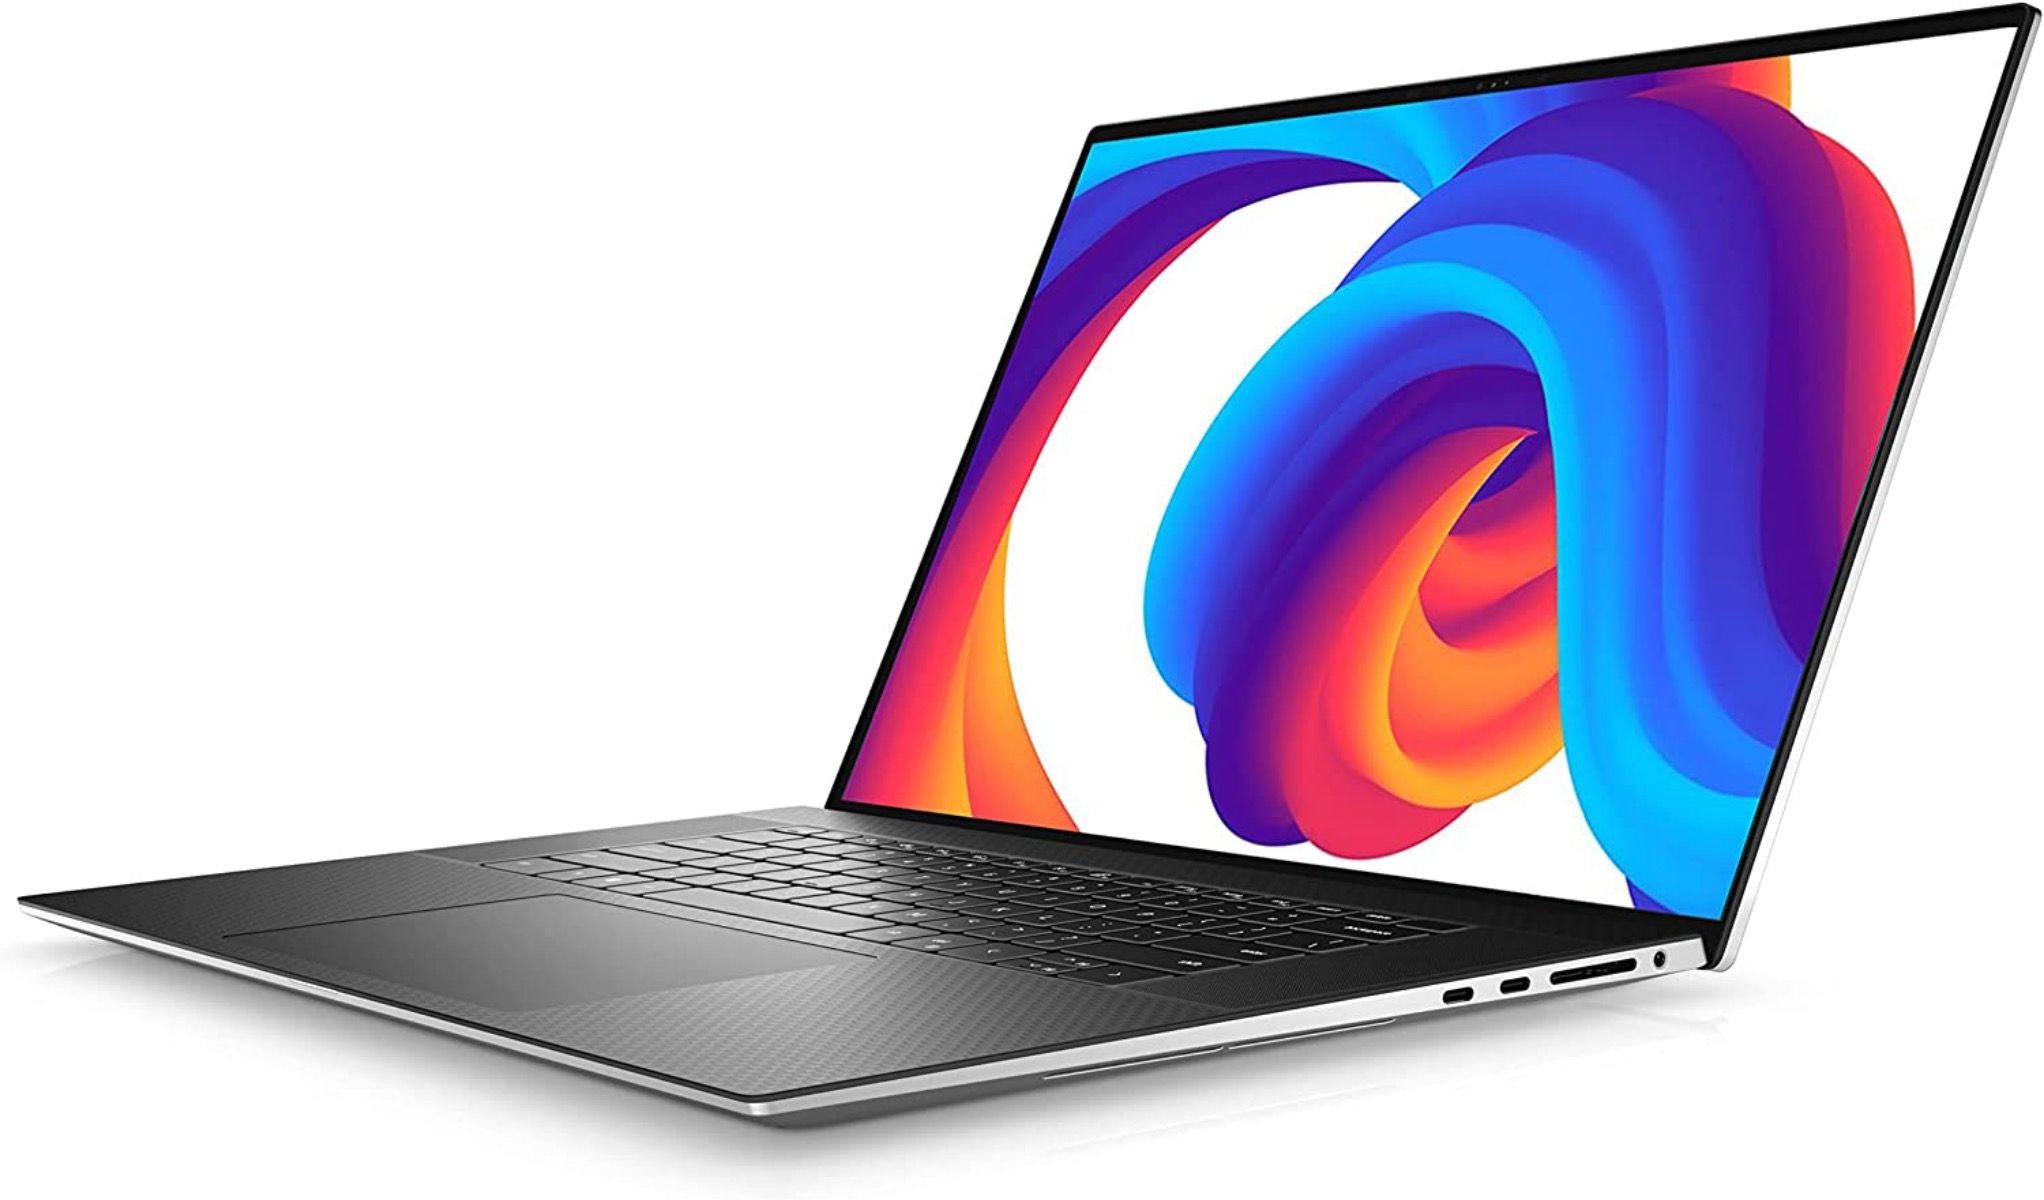 Side shot of the Dell XPS 17 with colorful display lit up